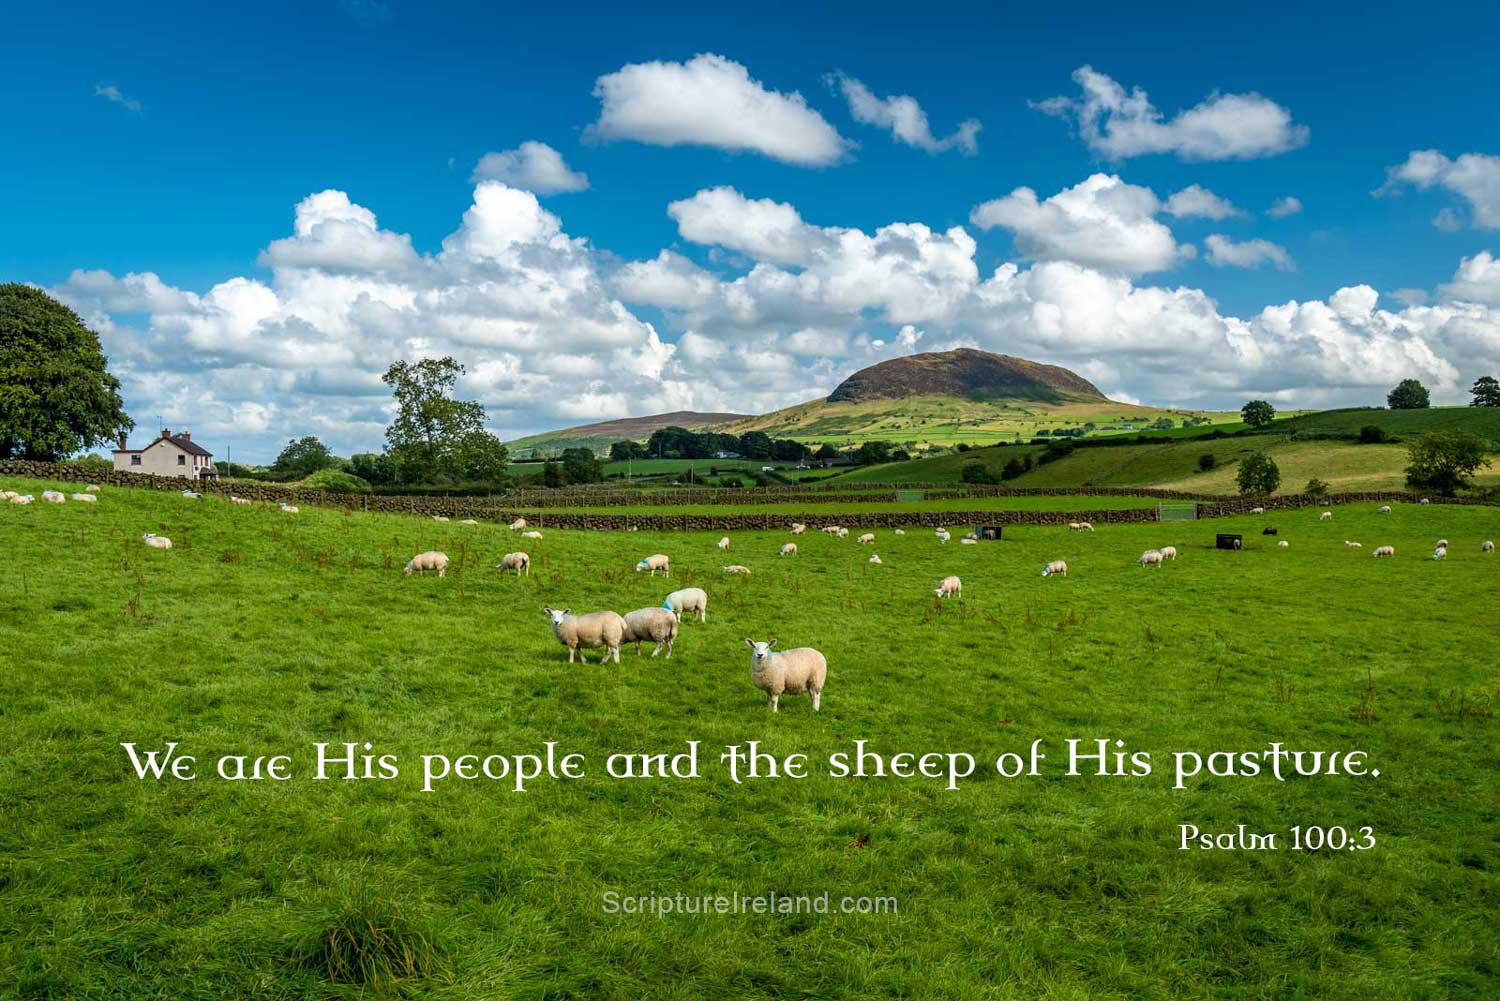 Slemish, County Antrim, where it is said Saint Patrick spent six years tending sheep as a slave from age sixteen